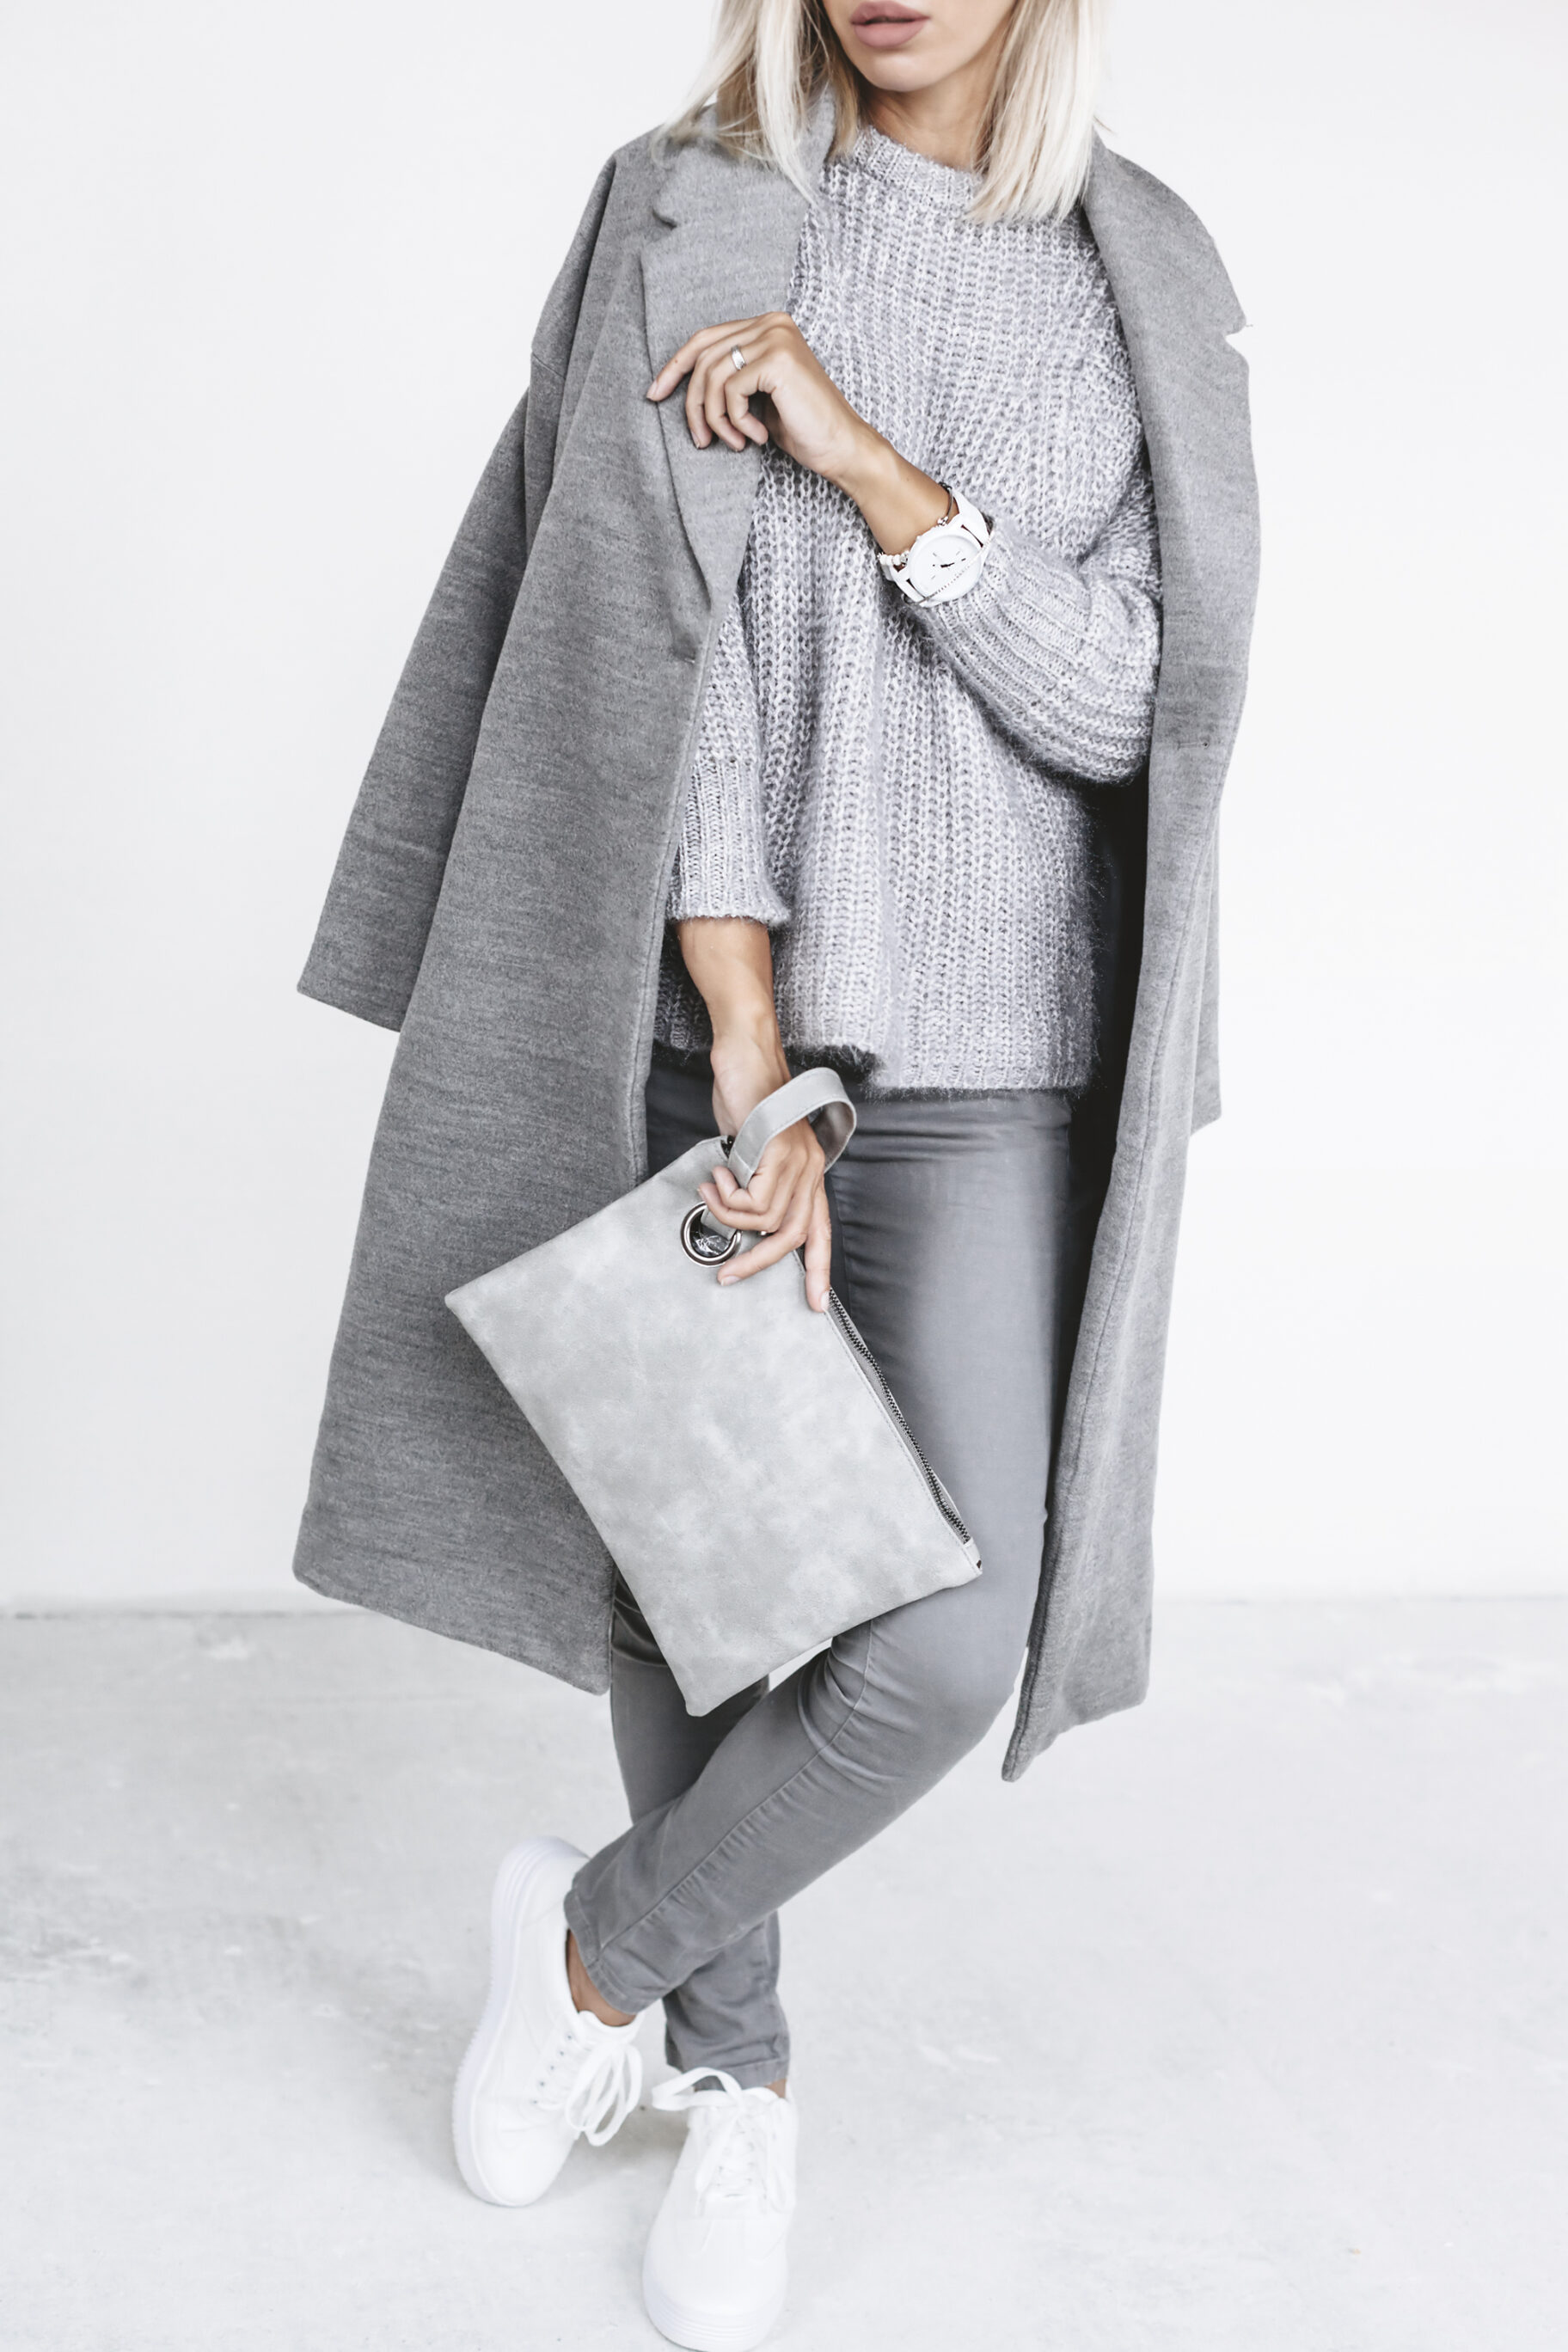 All-grey Outfits